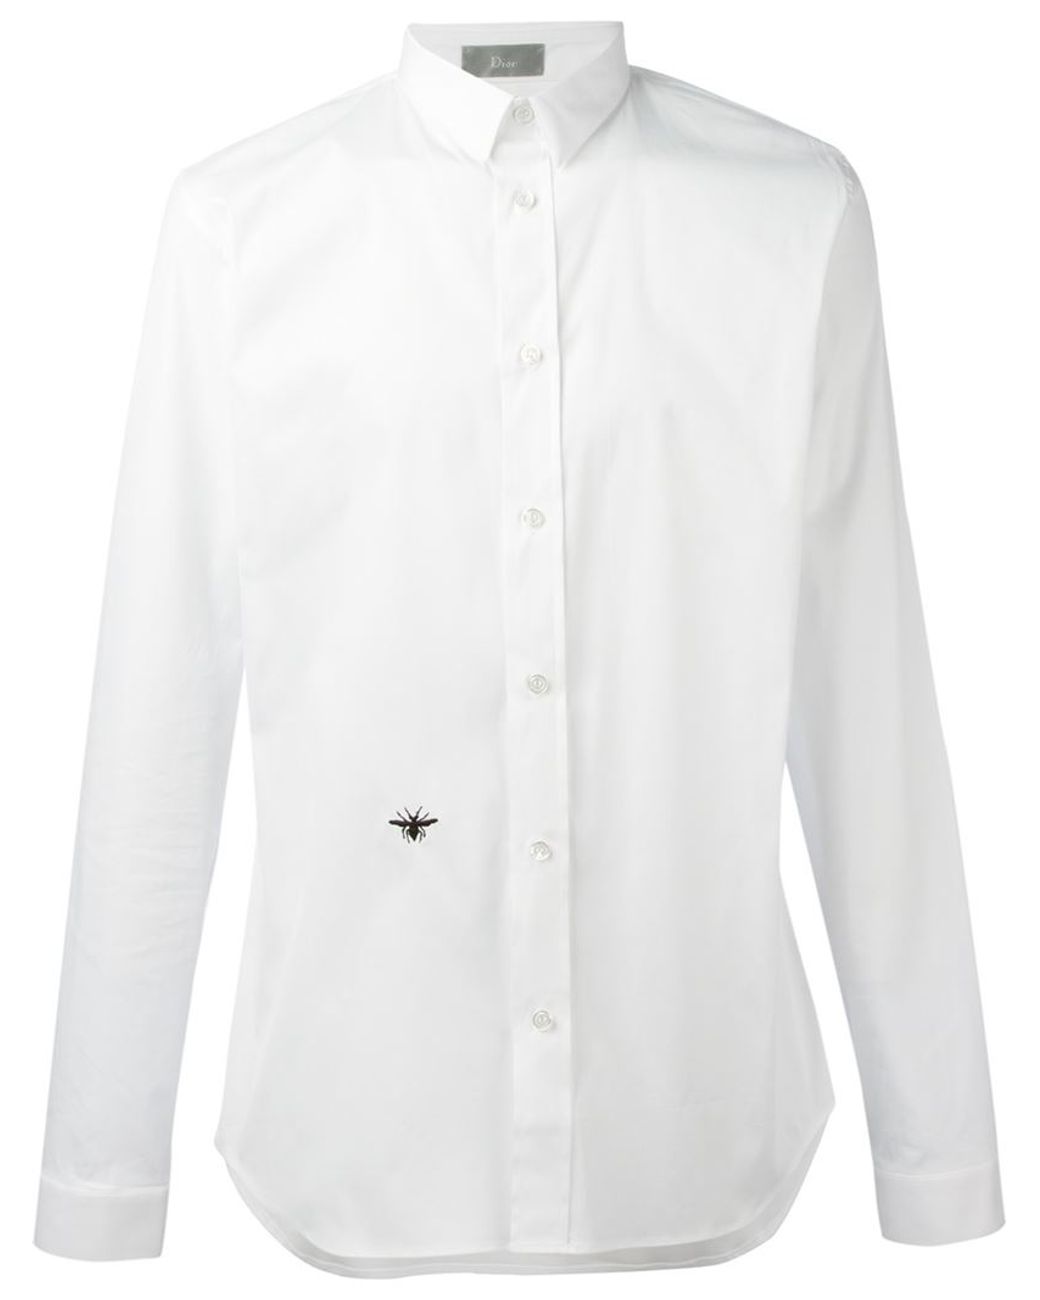 Shirt with Bee Embroidery Blue Cotton Poplin  DIOR